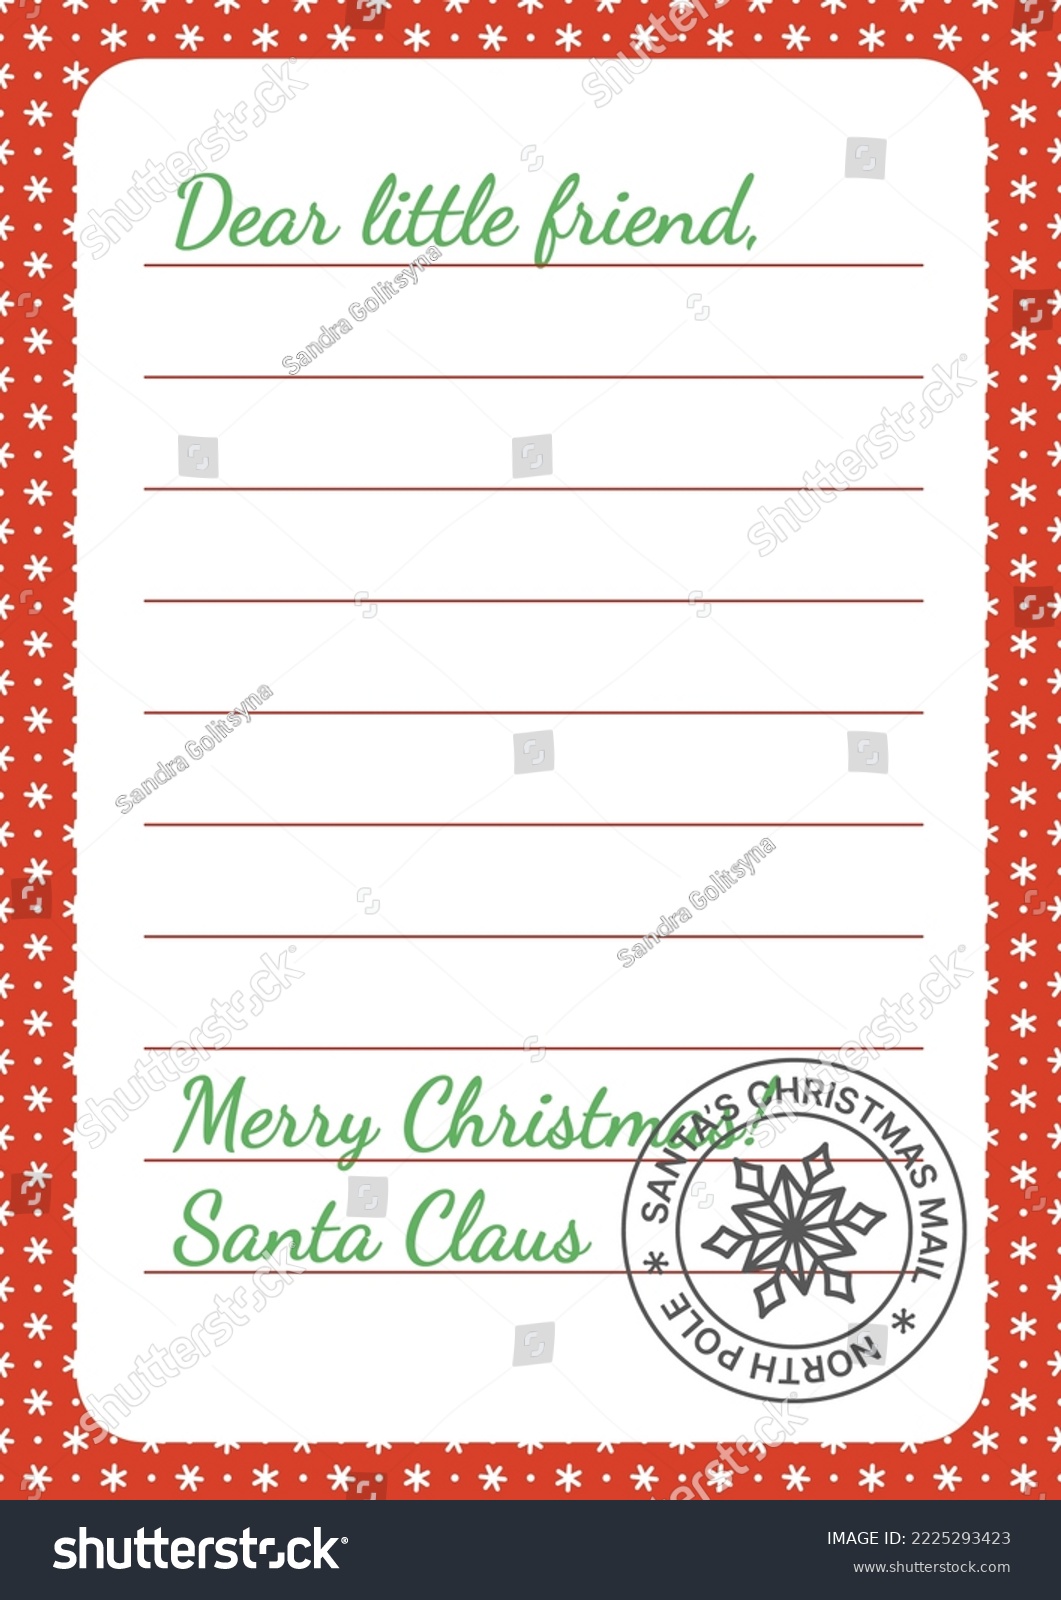 SVG of Dear little friend. Reply letter from Santa Claus. Template for Santa's answer. Flat, cartoon. Isolated vector illustration eps 10 svg